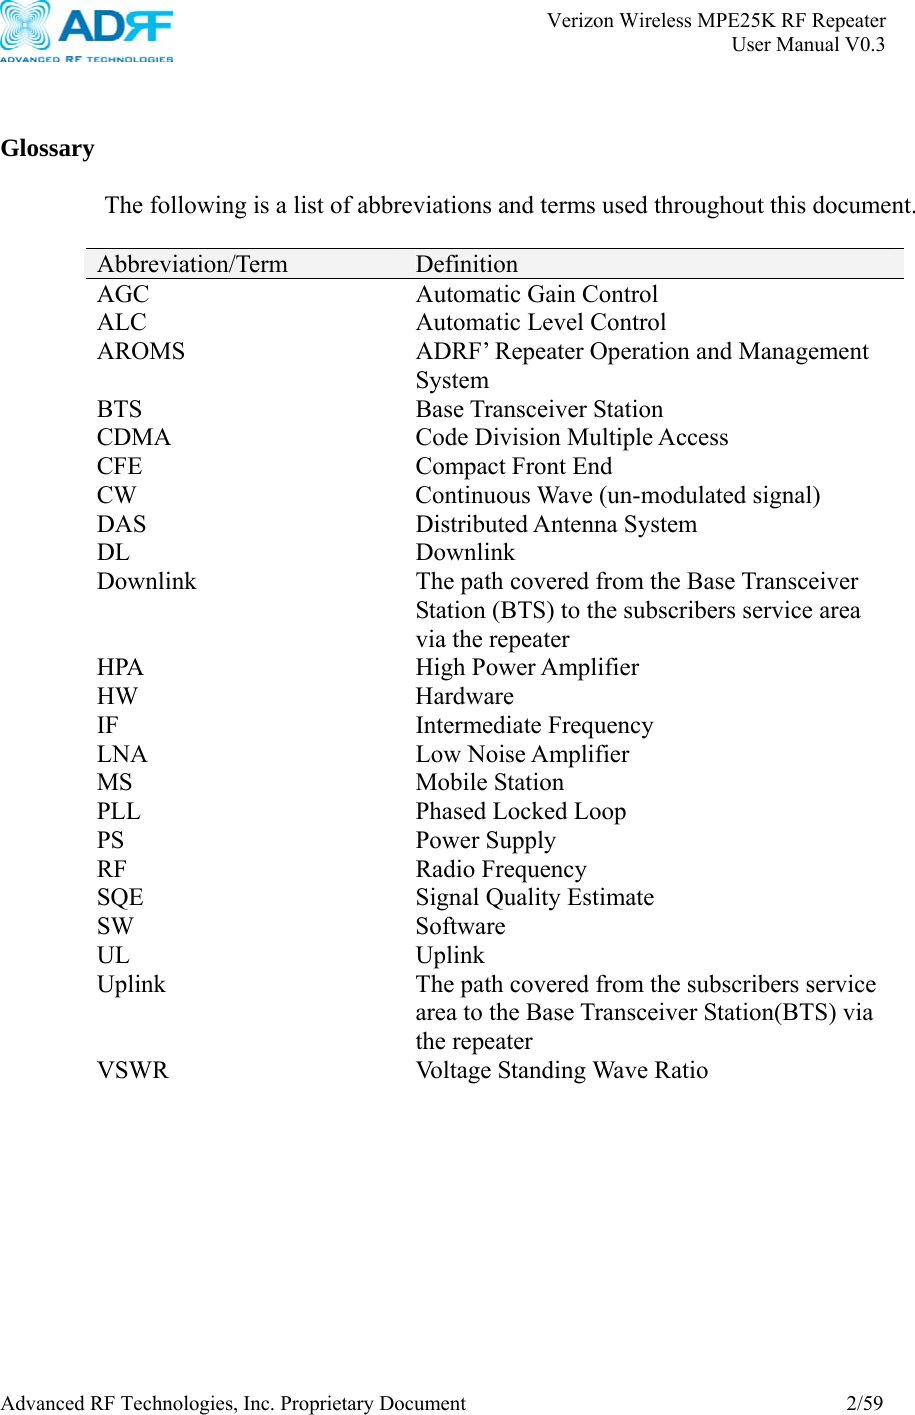       Verizon Wireless MPE25K RF Repeater   User Manual V0.3 Advanced RF Technologies, Inc. Proprietary Document  2/59  Glossary The following is a list of abbreviations and terms used throughout this document.  Abbreviation/Term  Definition AGC Automatic Gain Control ALC  Automatic Level Control AROMS ADRF’ Repeater Operation and Management System BTS Base Transceiver Station CDMA  Code Division Multiple Access CFE  Compact Front End CW Continuous Wave (un-modulated signal) DAS Distributed Antenna System DL Downlink Downlink  The path covered from the Base Transceiver Station (BTS) to the subscribers service area via the repeater HPA High Power Amplifier HW Hardware IF Intermediate Frequency LNA Low Noise Amplifier MS Mobile Station  PLL  Phased Locked Loop PS Power Supply RF Radio Frequency SQE  Signal Quality Estimate SW Software UL Uplink Uplink  The path covered from the subscribers service area to the Base Transceiver Station(BTS) via the repeater   VSWR  Voltage Standing Wave Ratio  